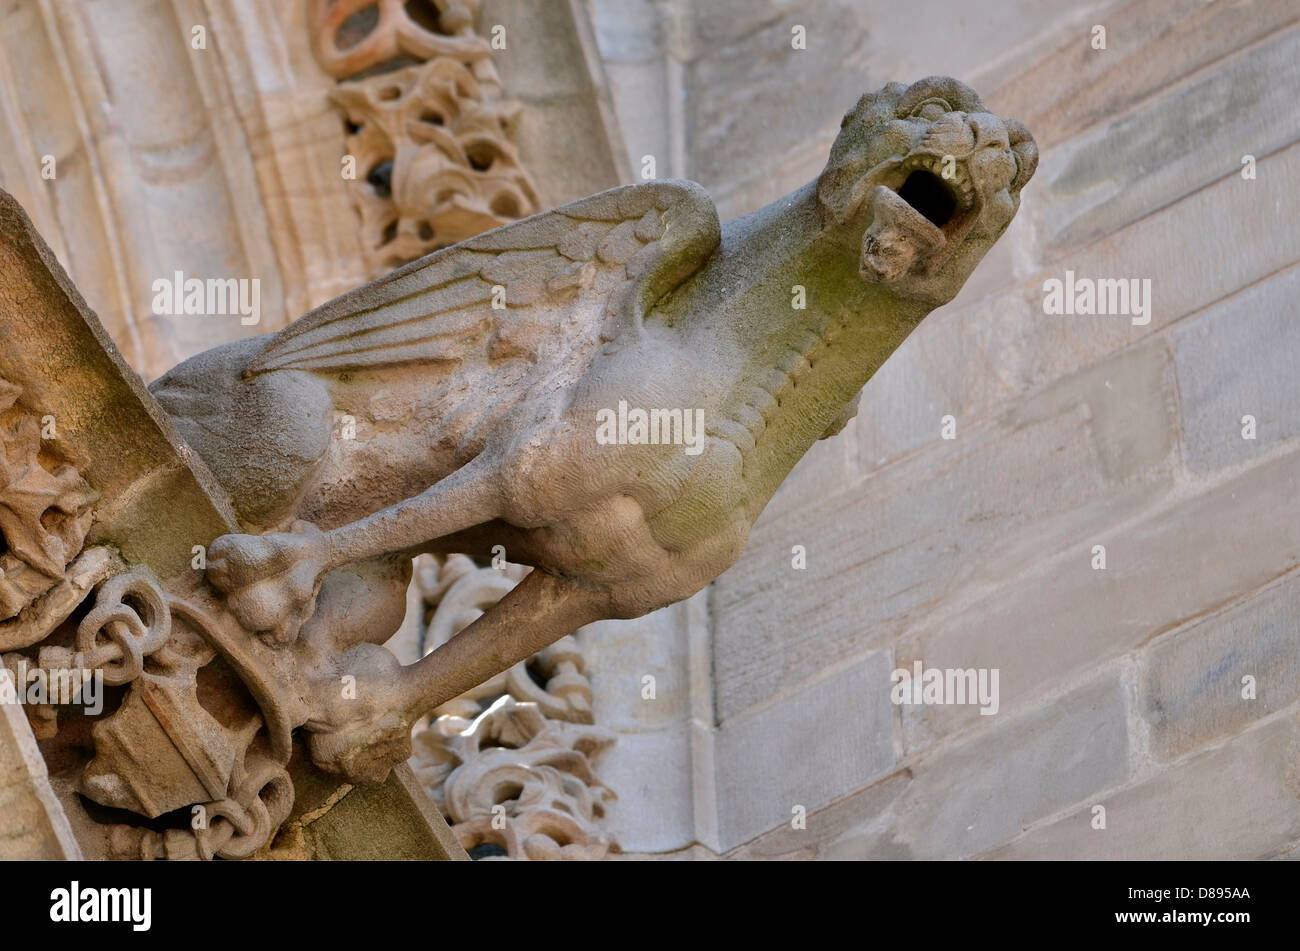 Closeup gargoyle, viewed from below, of the Sainte Cécile cathedral at Albi in southern France, Midi Pyrénées region, Tarn depar Stock Photo